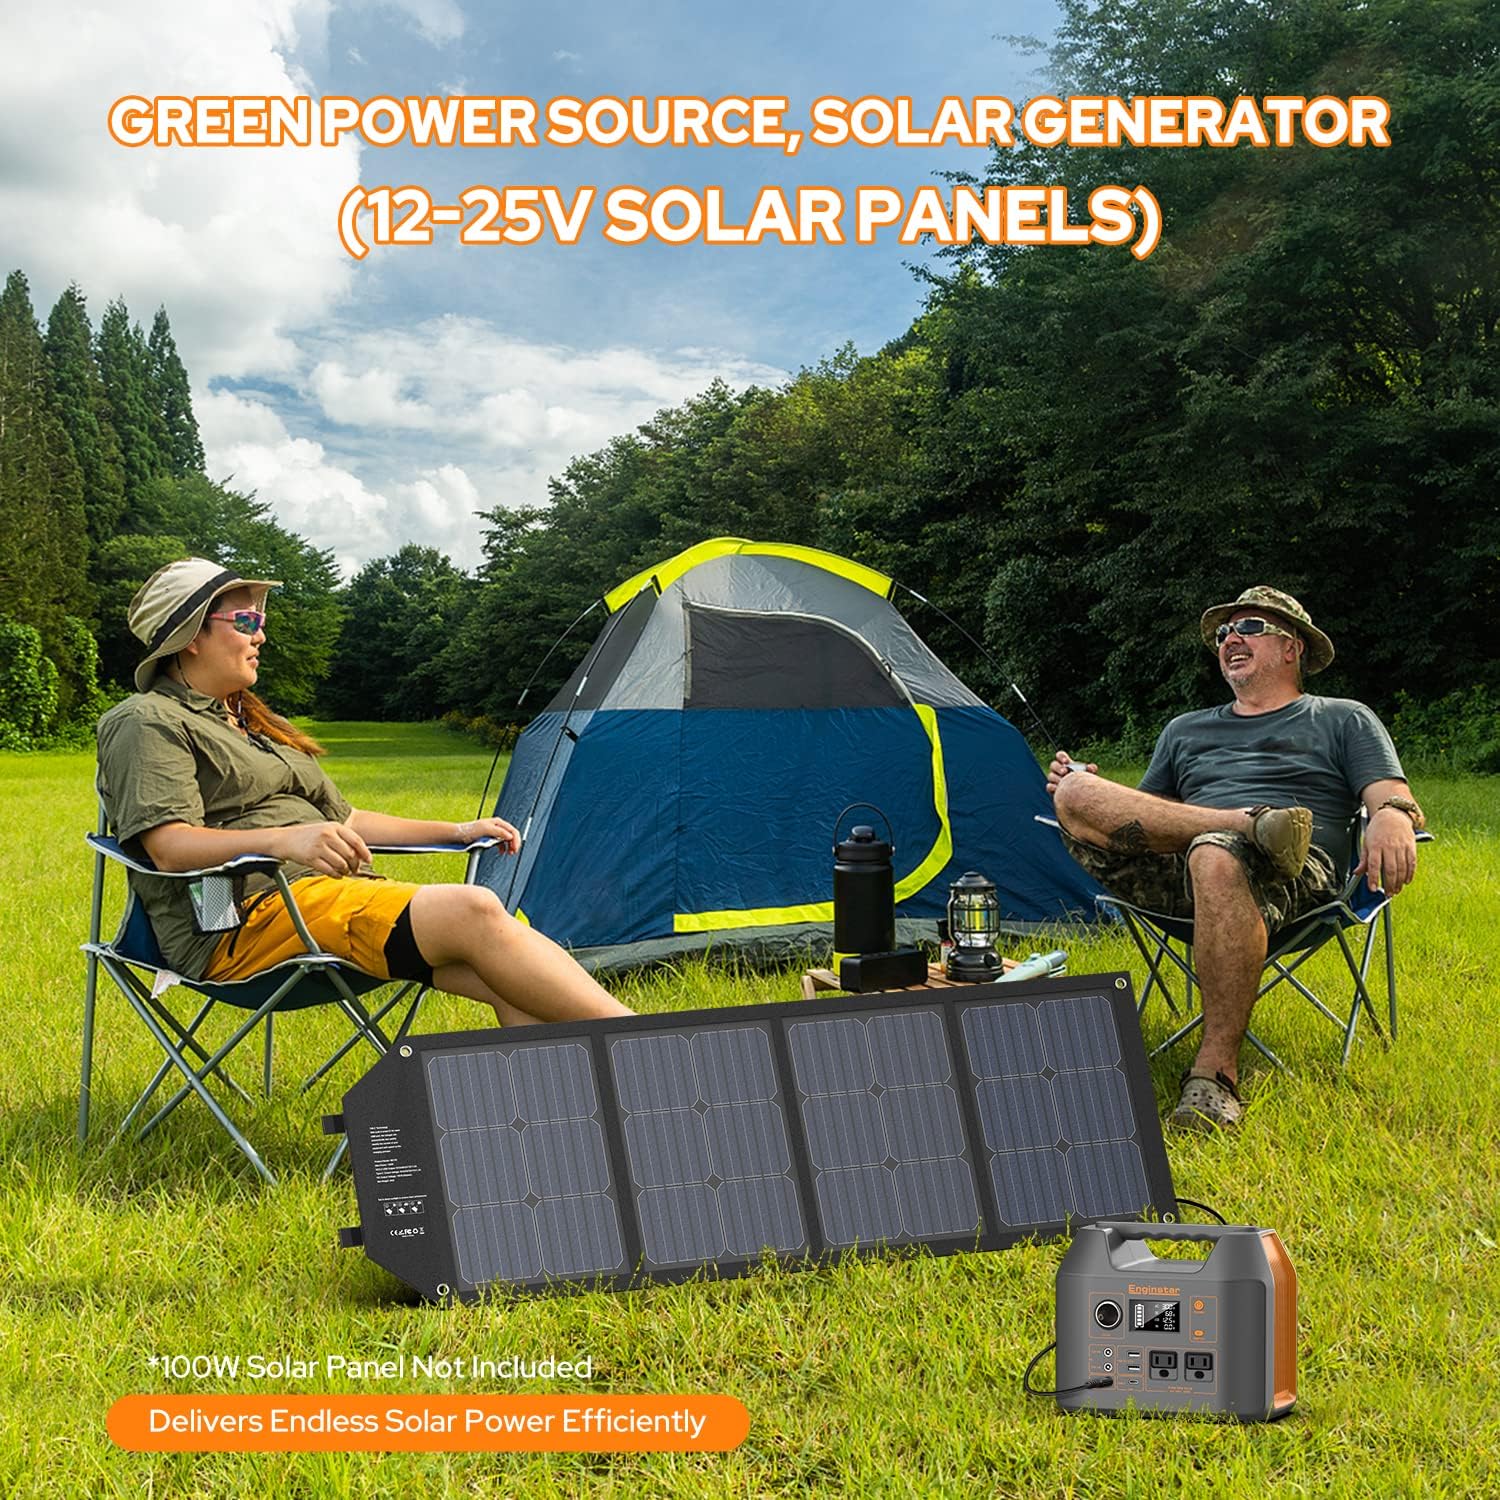 EnginStar Solar Generator, 300W Portable Power Station, 296Wh Lithium Battery Backup w/Two 110V Pure Sine Wave AC Outlet for Camping Road Trip RV, 80000mAh Sufficient Power Supply - EnginStar Solar Generator Review